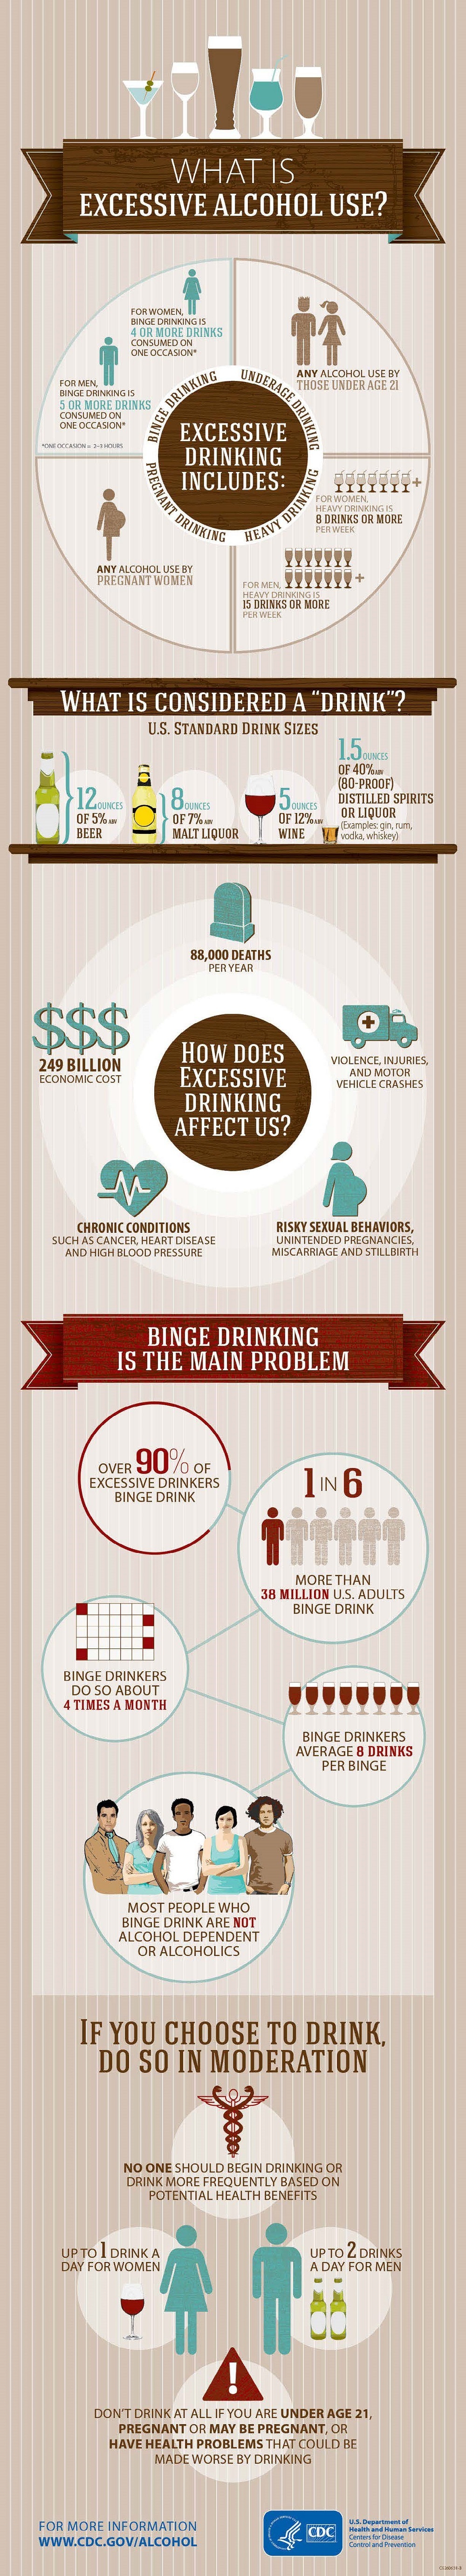 What is excessive alcohol use? 